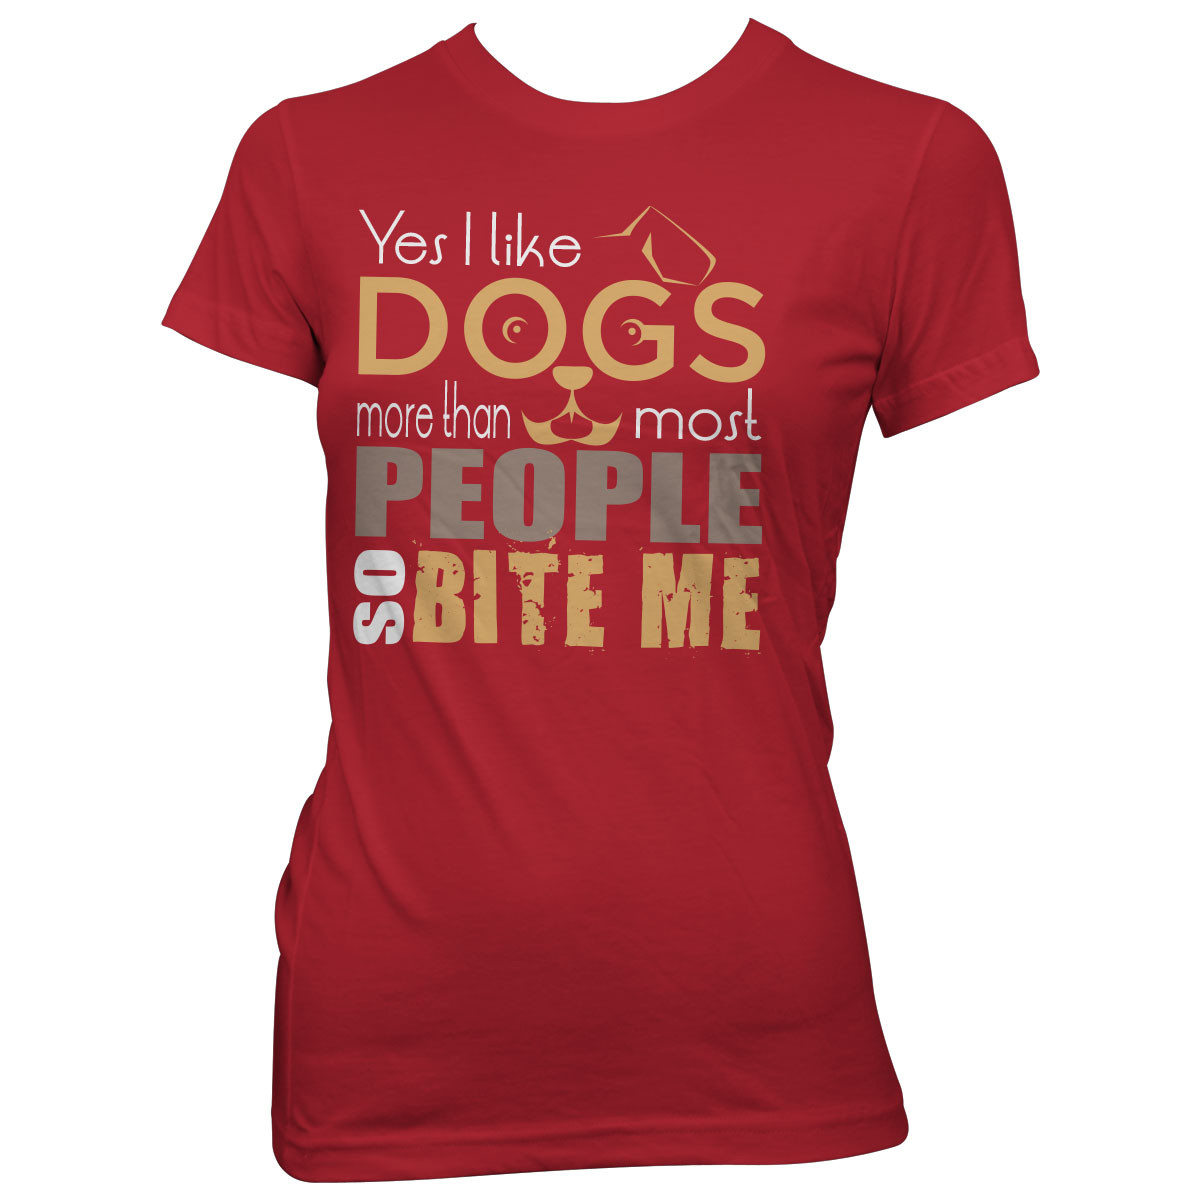 "I lIke Dogs More Than People So Bite Me" T-Shirt